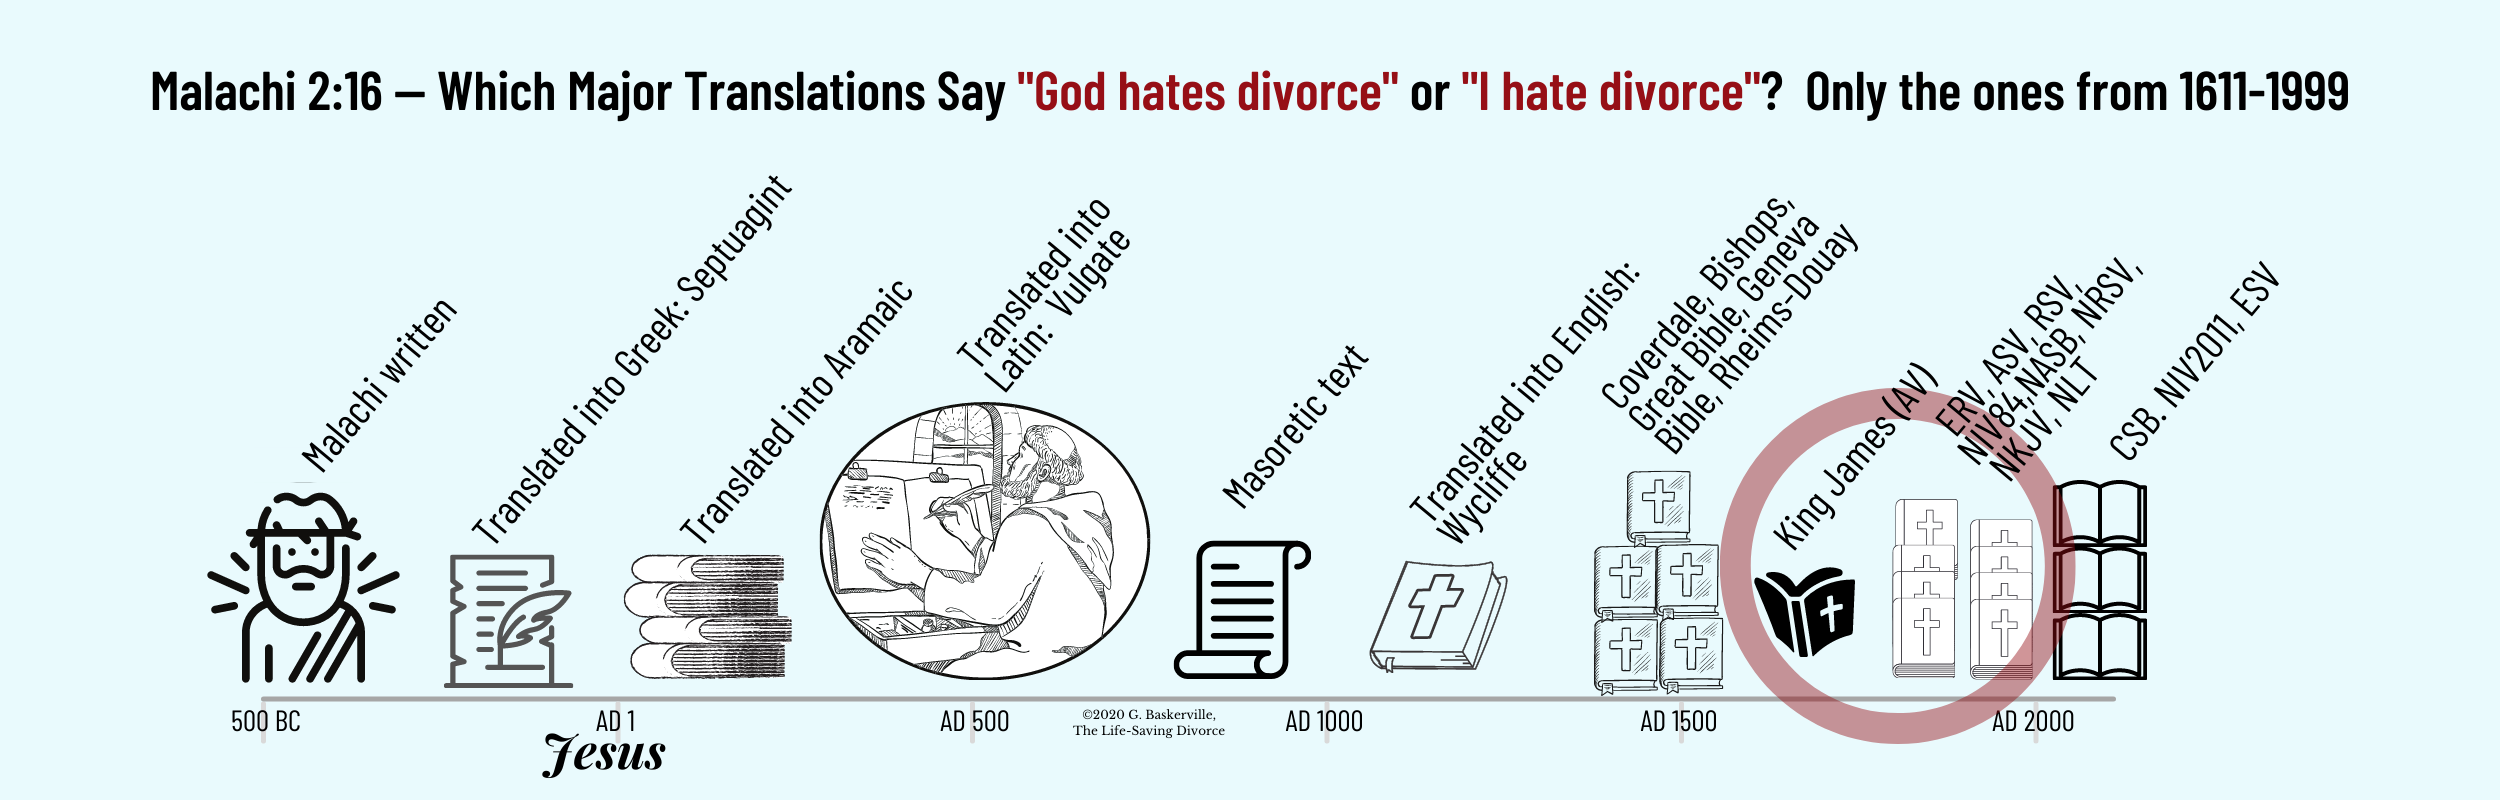 This infographic shows that from 450 BC to AD 1600, no known Bible translation interpreted Malachi 2:16 at "God hates divorce" or "I have divorce." 